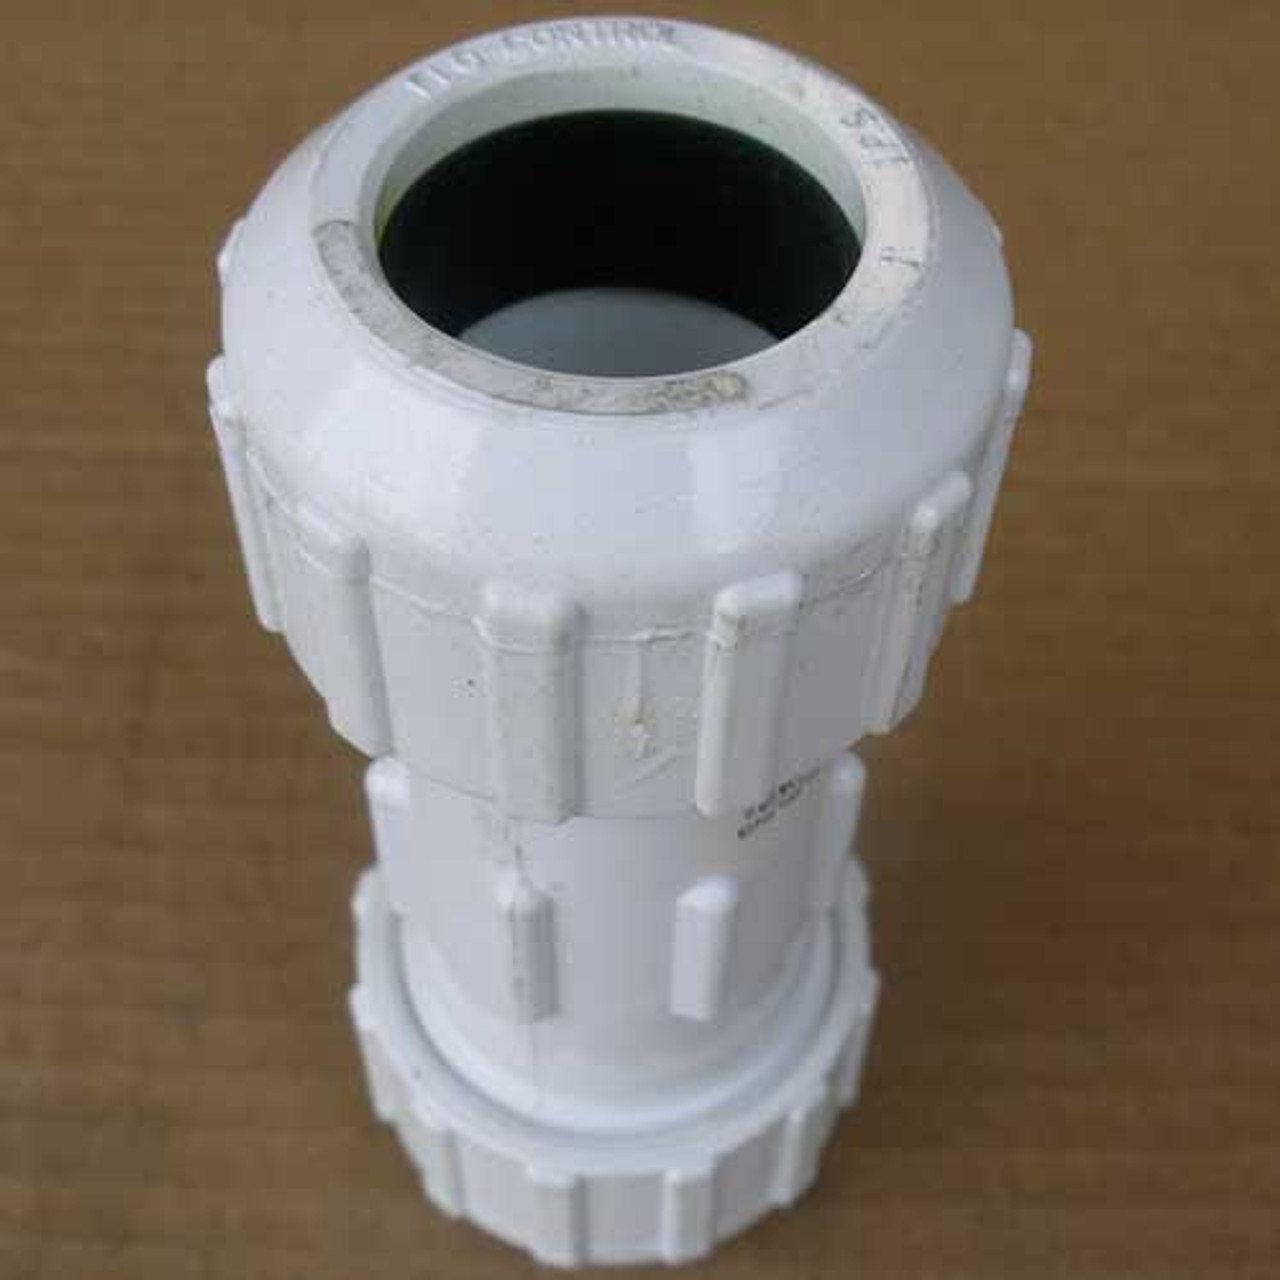 AD Technologies 1" PVC Compression Coupling (Lot of 3) - New